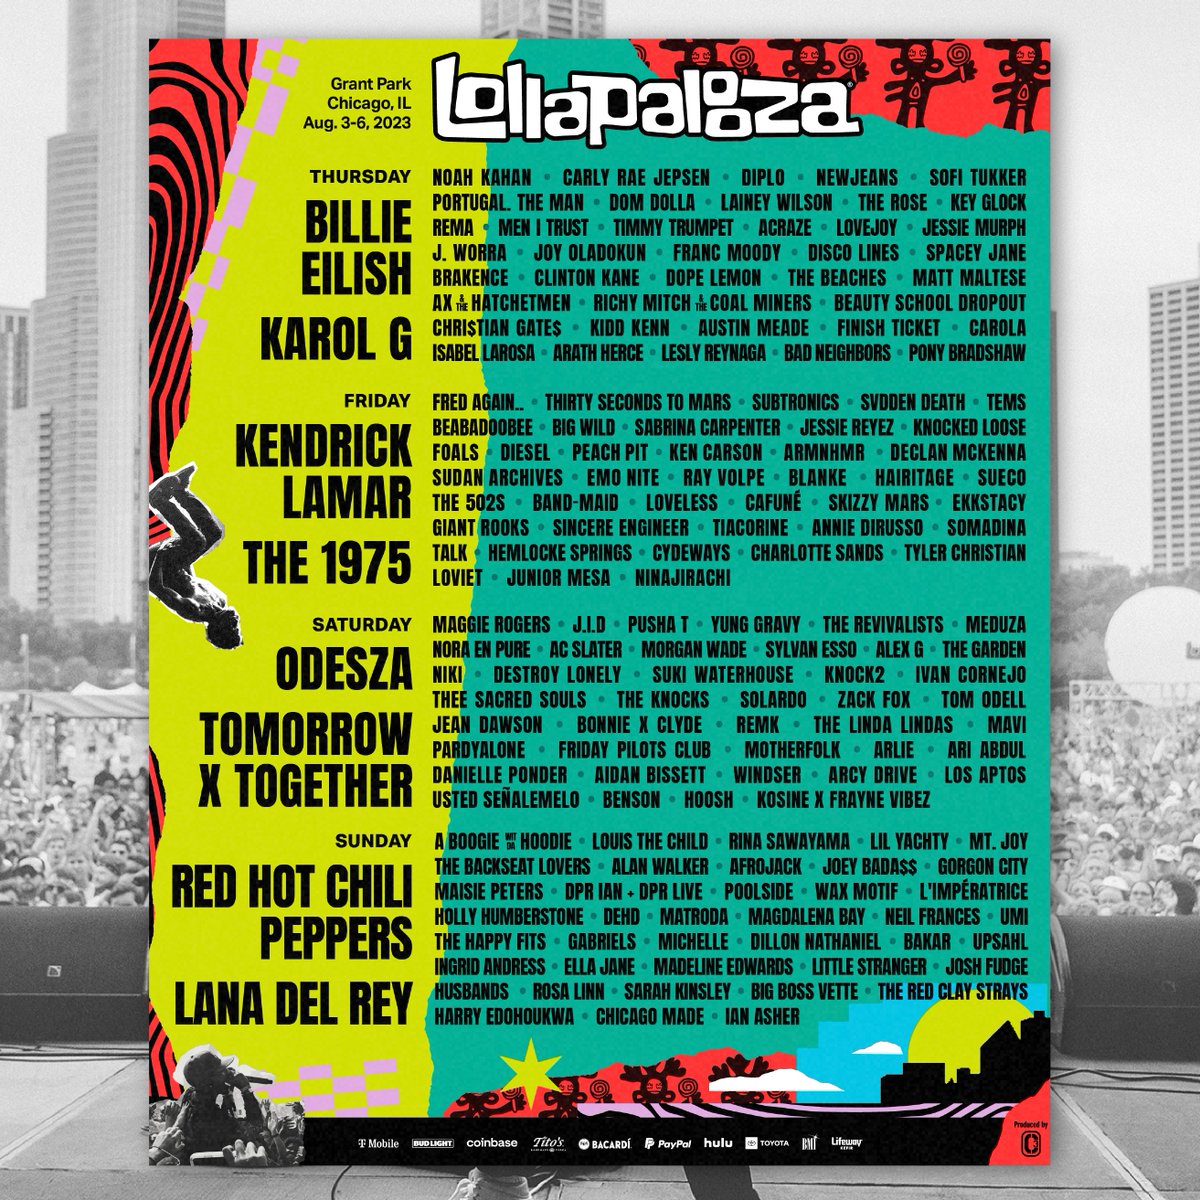 Enter to win a pair of passes to @lollapalooza to see Billie Eilish, Kendrick Lamar, The 1975 & more! 💥 ENTER HERE: instagram.com/p/CuHt2vFubJU/